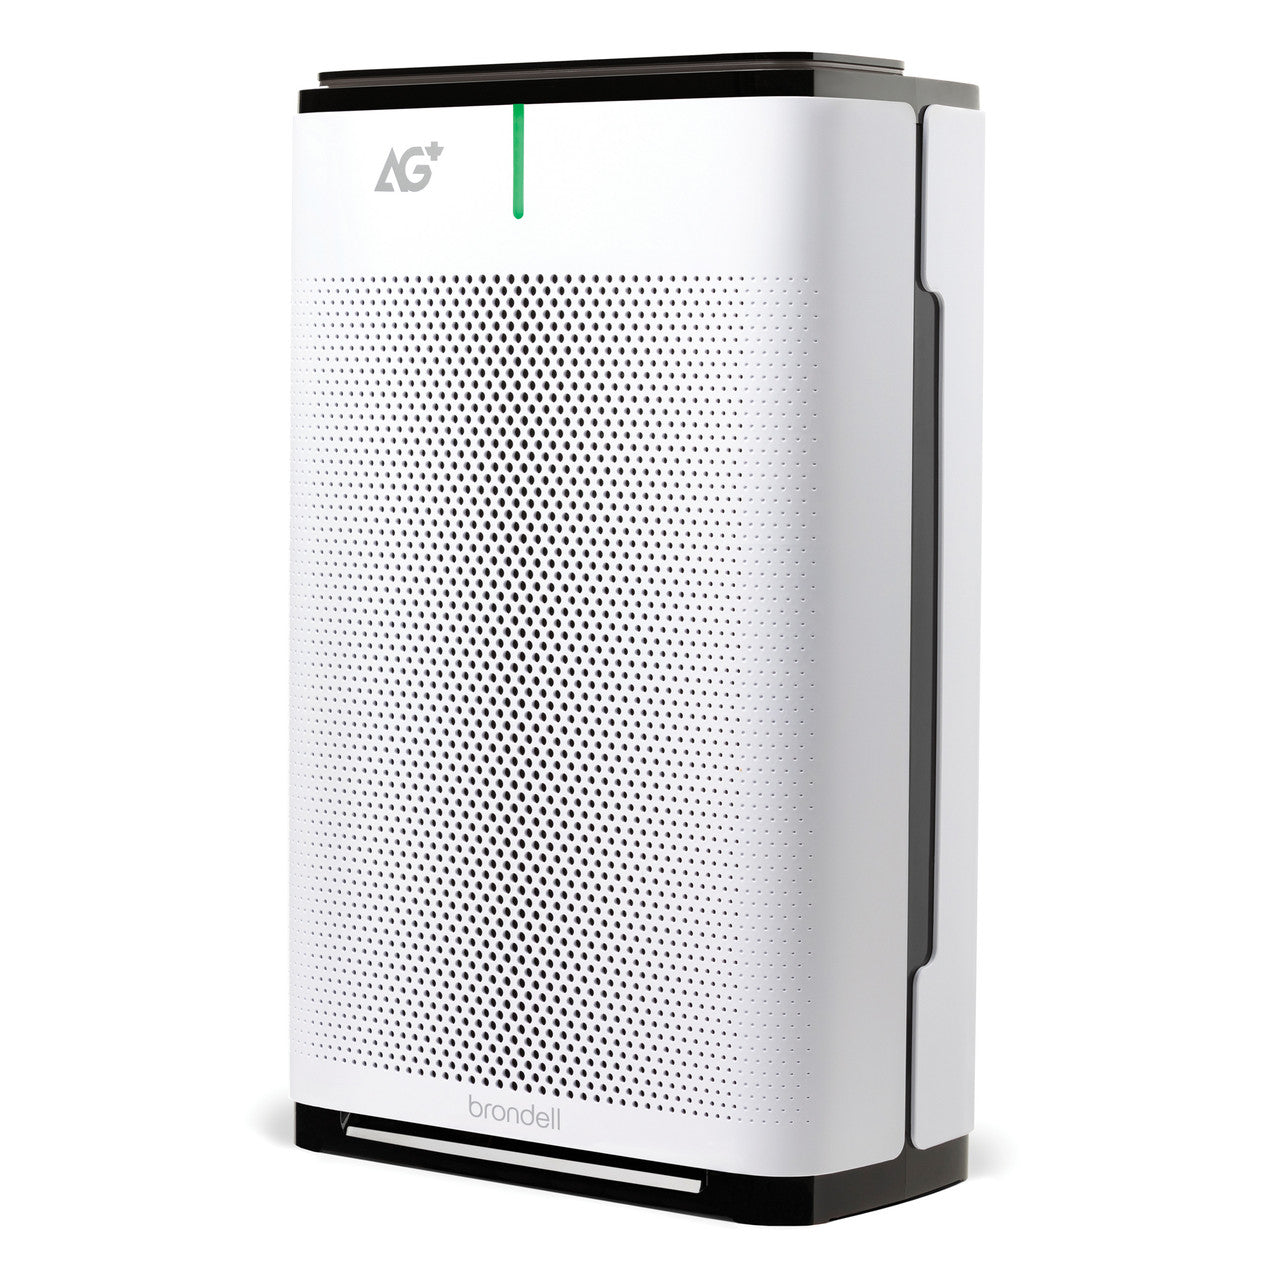 Brondell Pro Sanitizing Air Purifier with AG+ Technology for Purification of SARS-CoV-2, Virus, Bacteria and Allergens